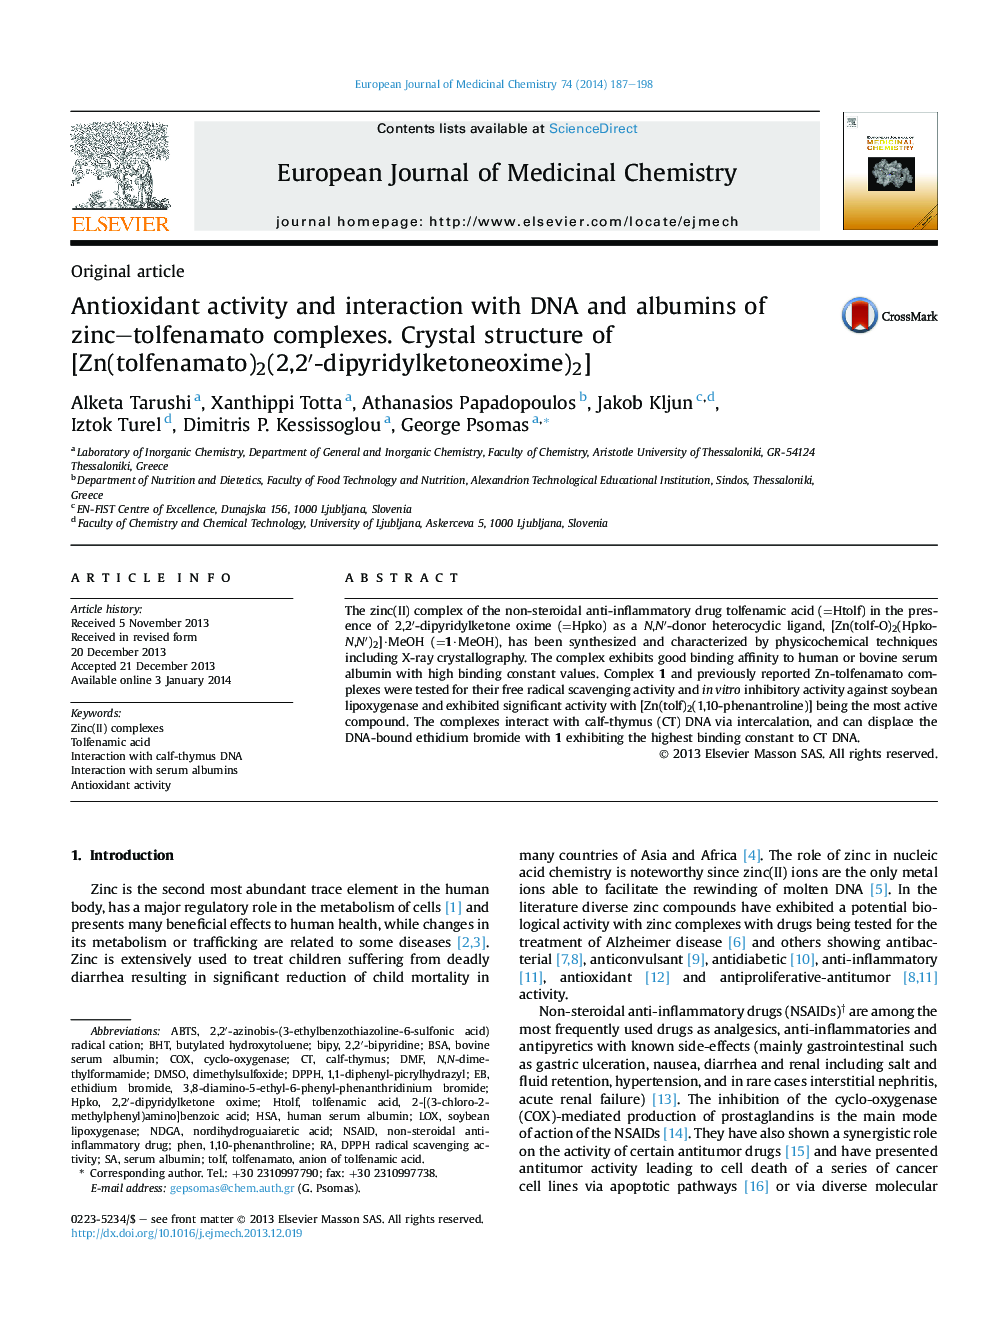 Antioxidant activity and interaction with DNA and albumins of zinc-tolfenamato complexes. Crystal structure of [Zn(tolfenamato)2(2,2â²-dipyridylketoneoxime)2]